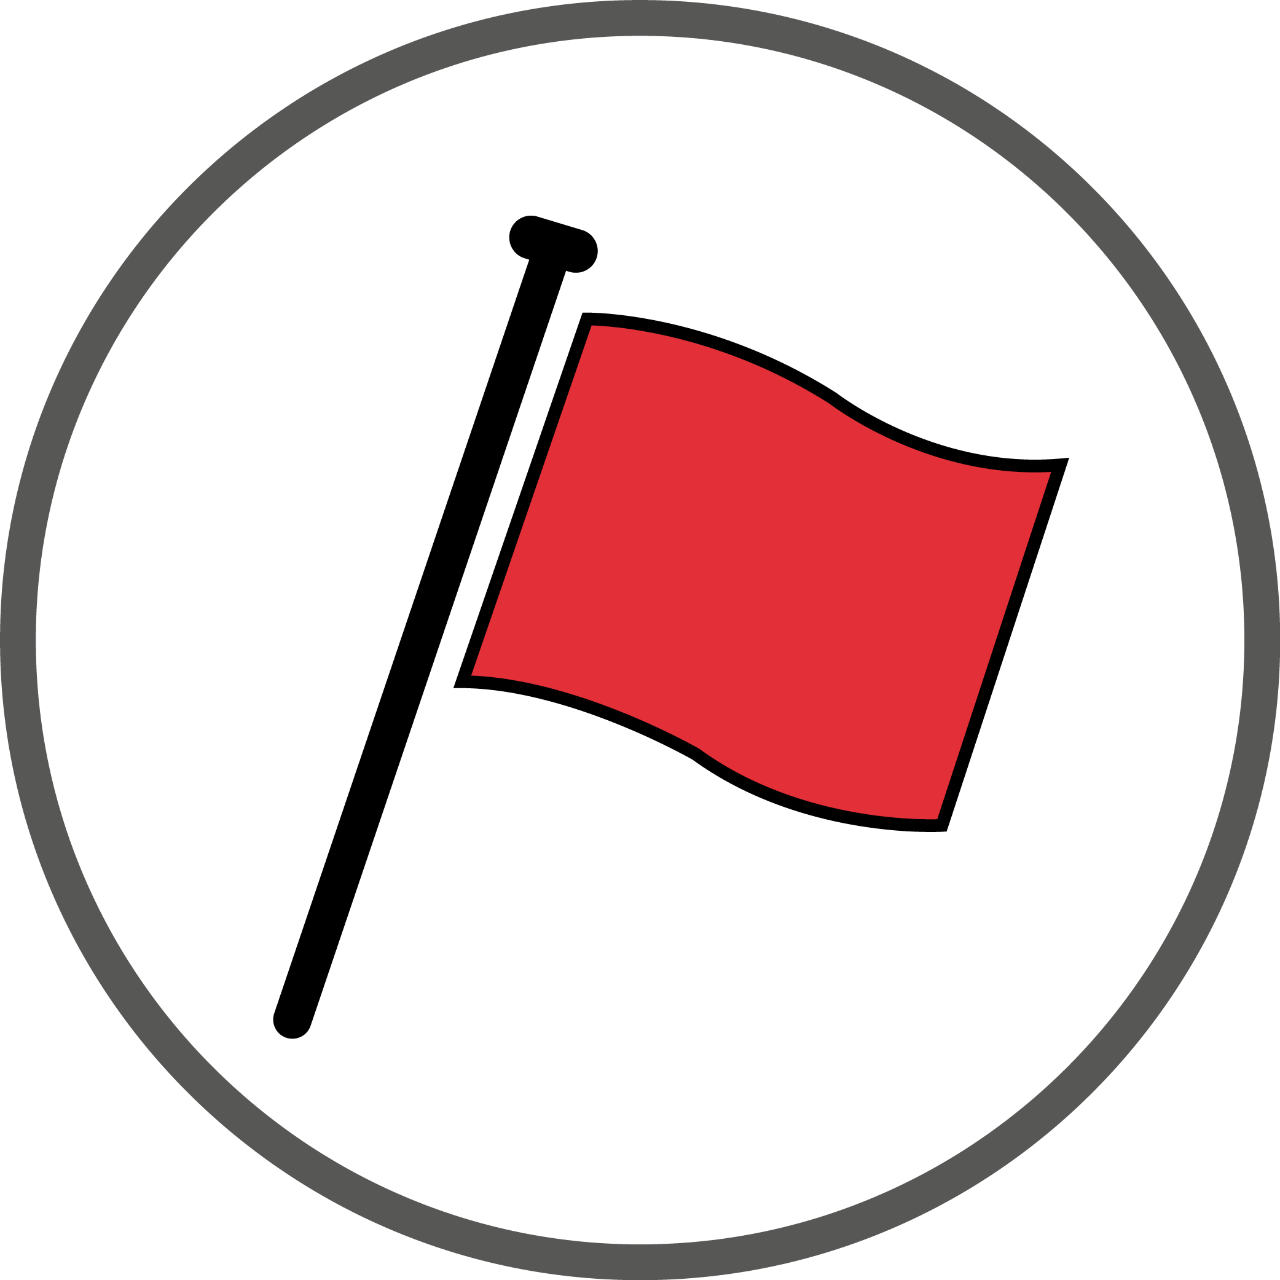 Red track day flag icon